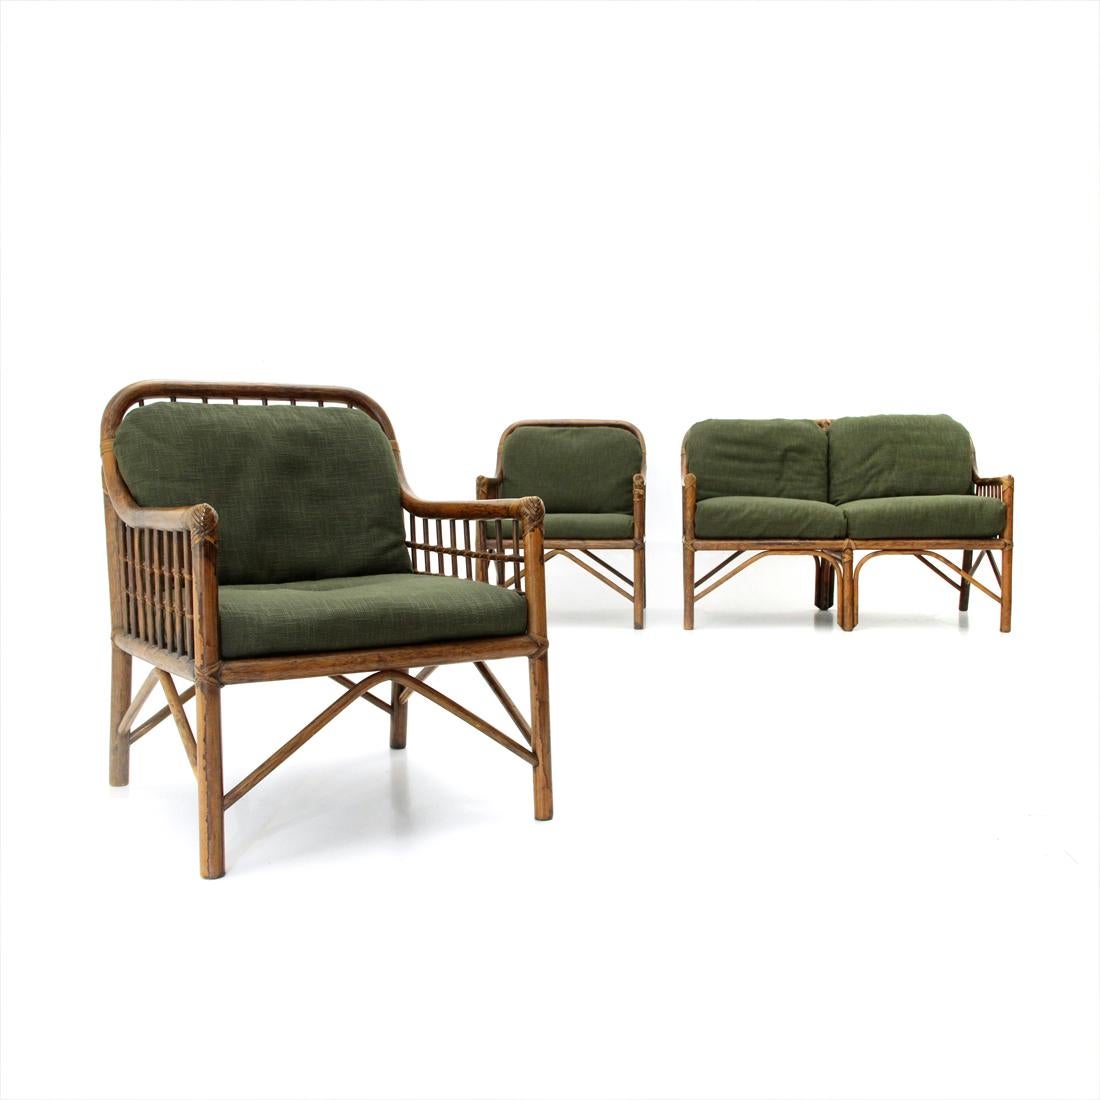 Late 20th Century 2 Italian Armchairs and Sofa in Woven Rattan and Green Fabric, 1970s